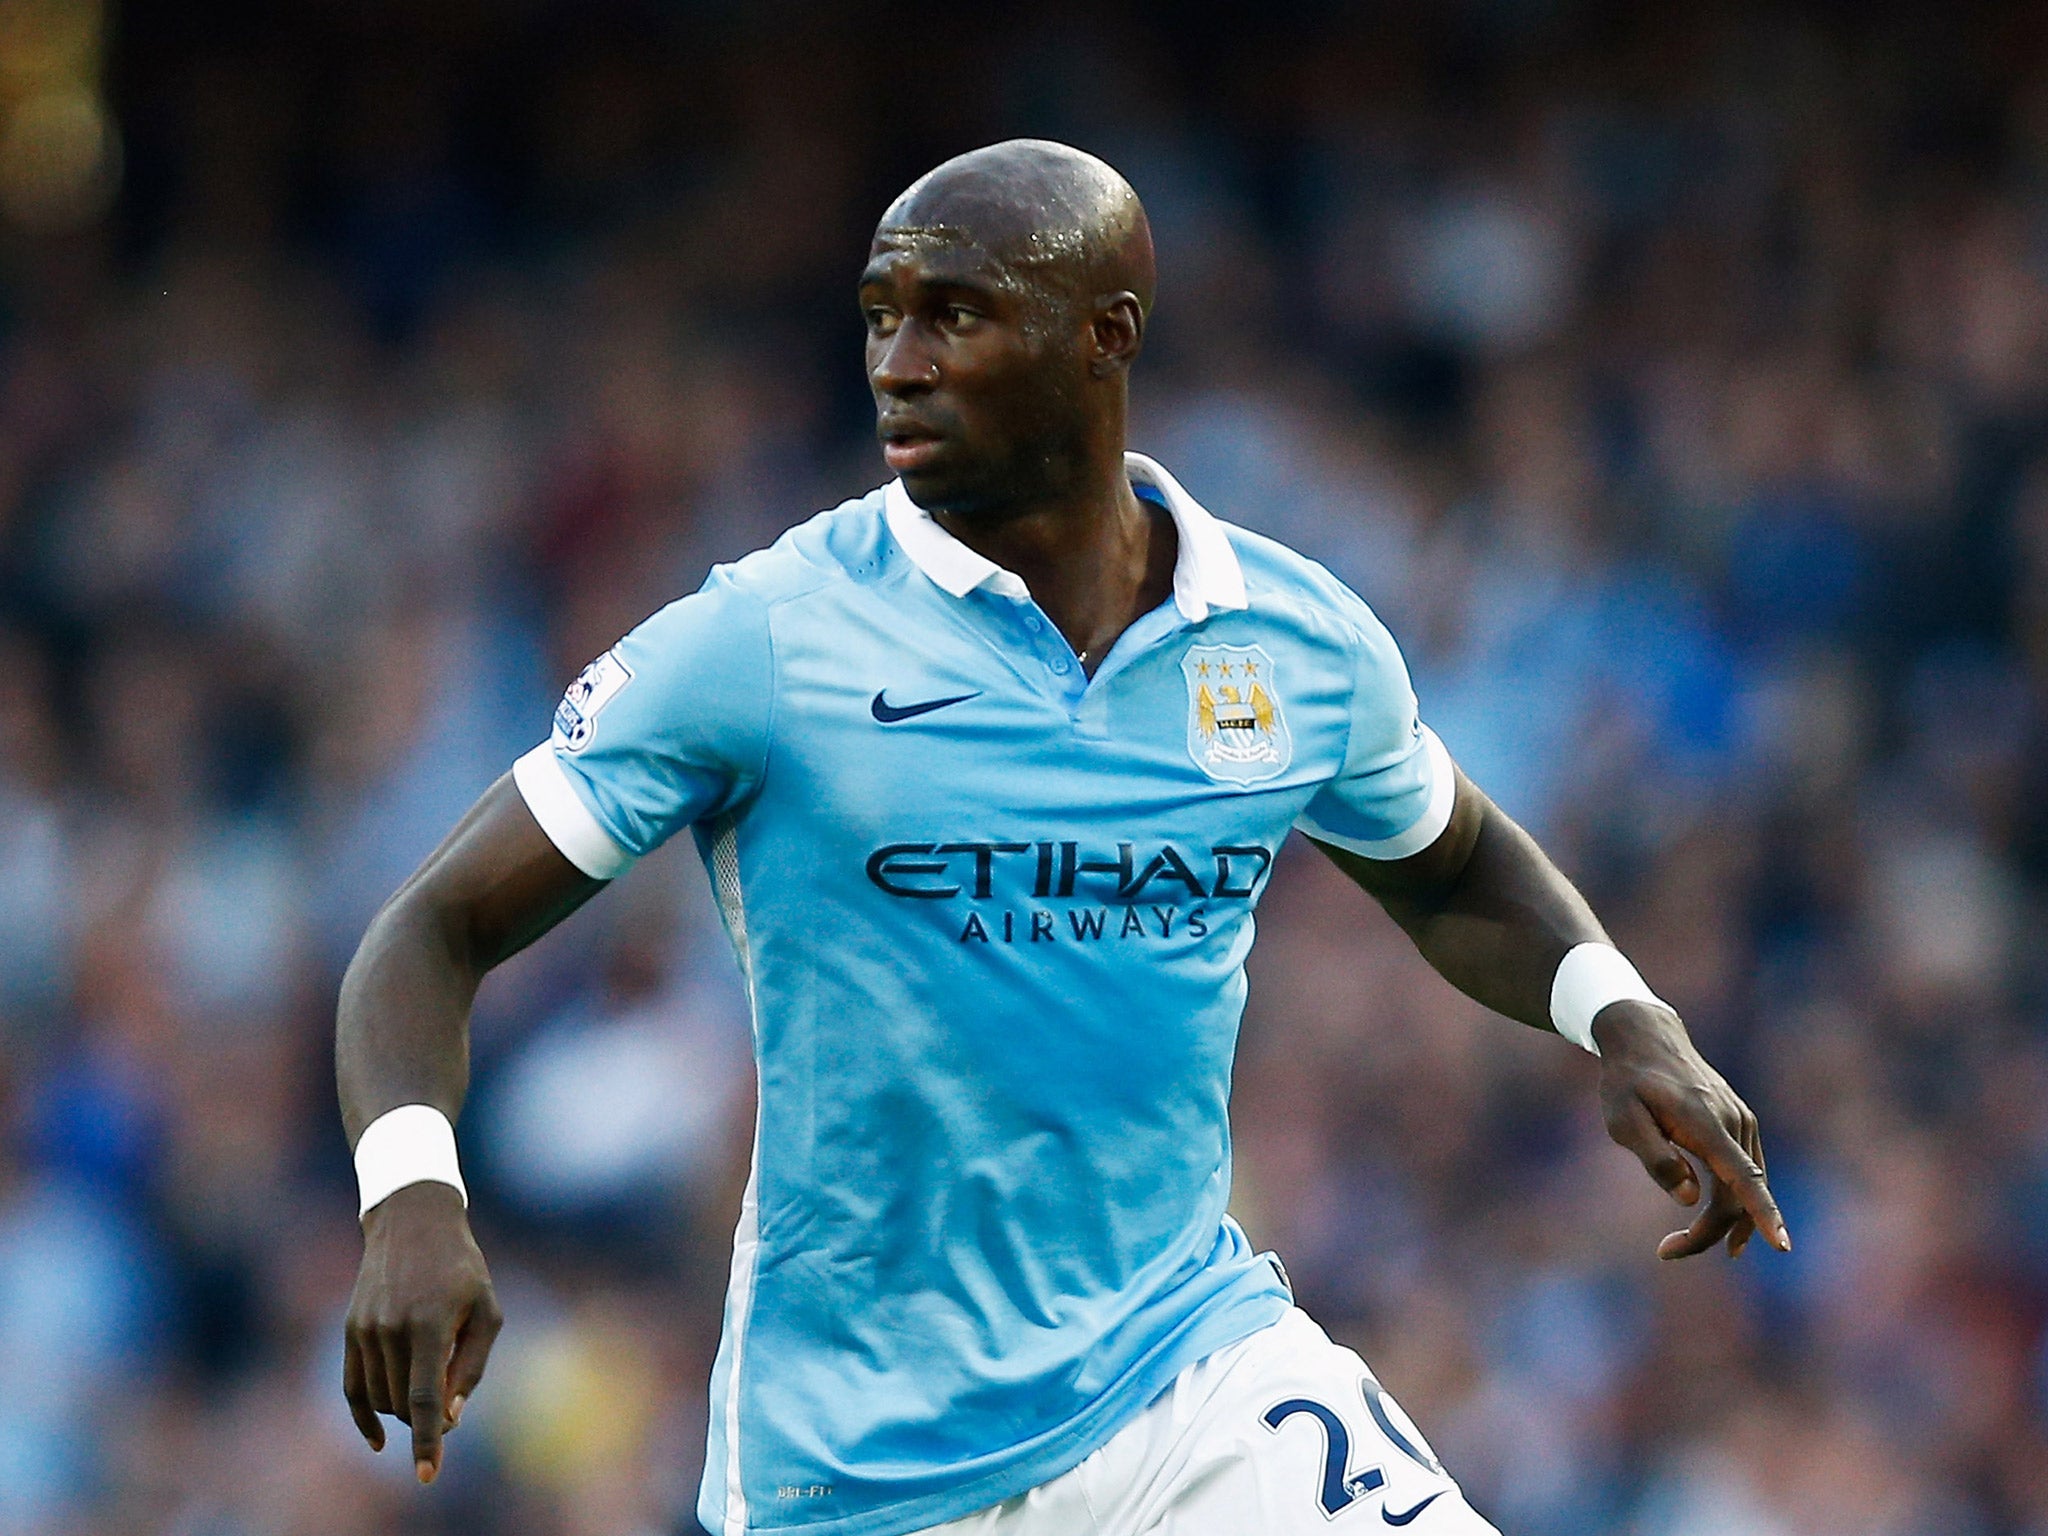 Mangala in action for Manchester City